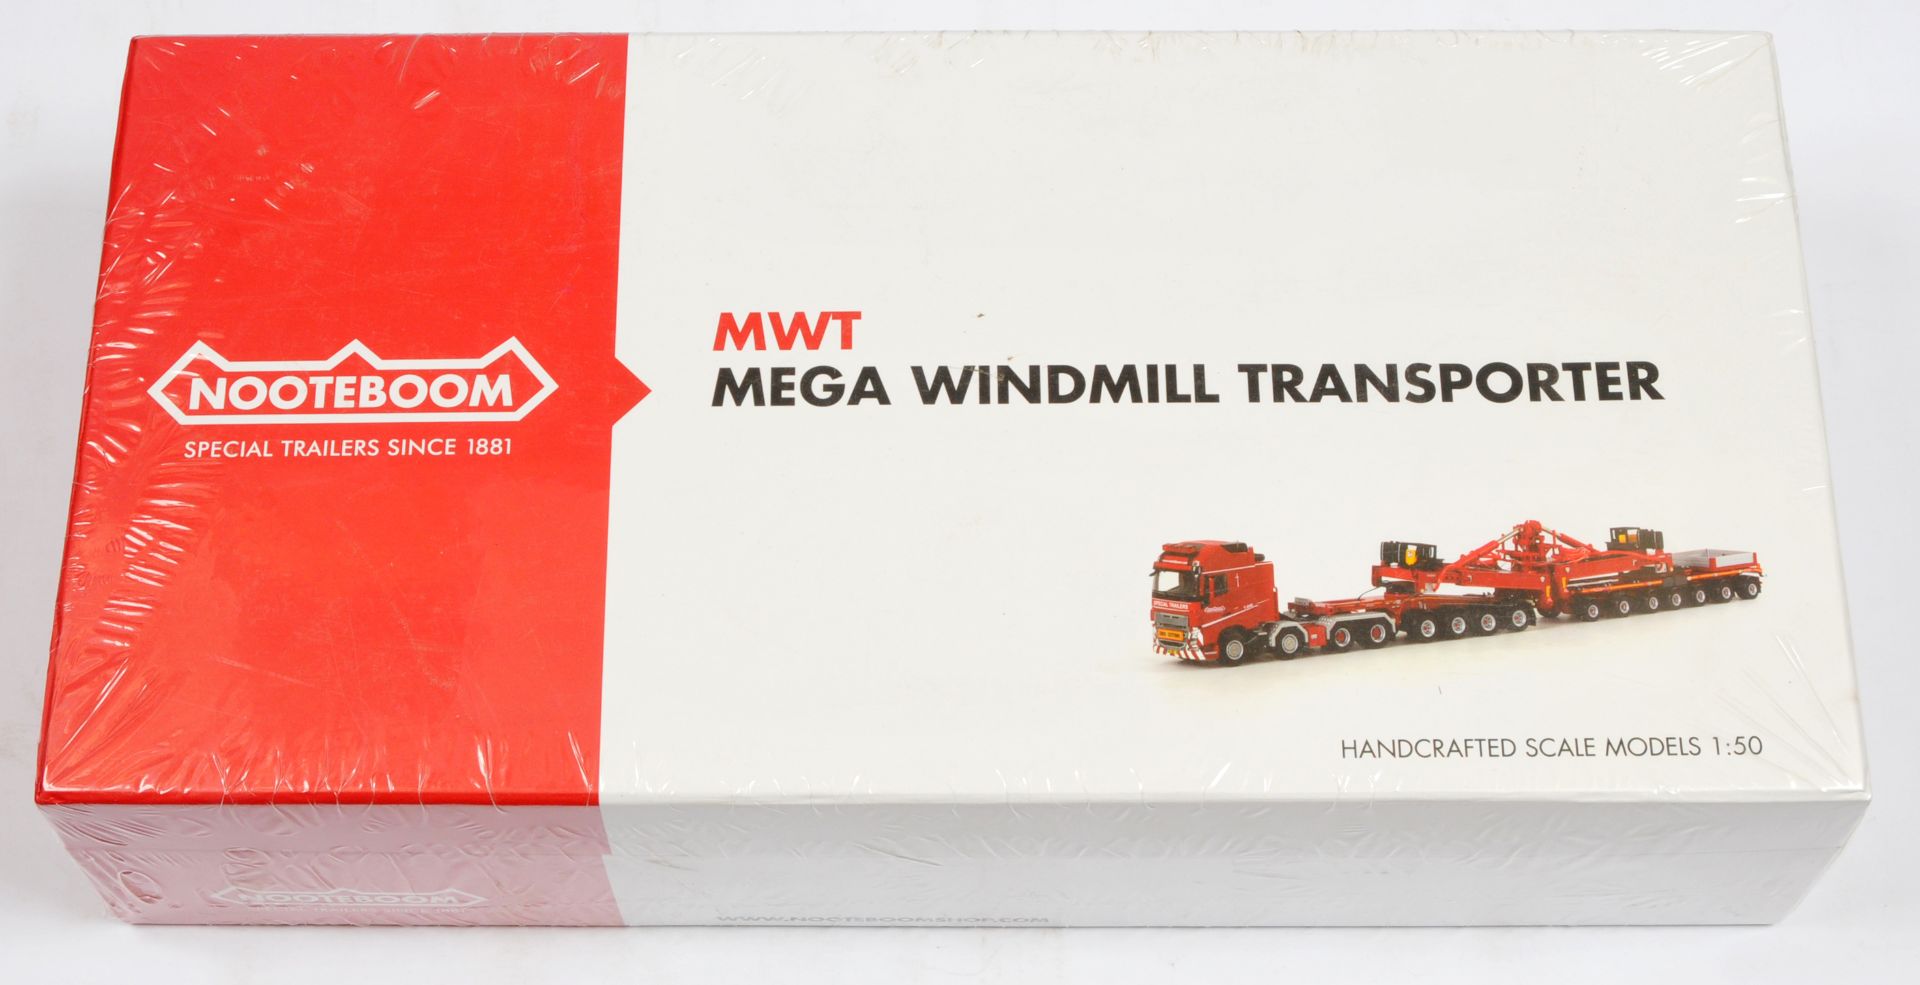 WSI Models (1/50th) 01-2327 "Nooteboom" Mercedes Actros "Mar-Train"   - Mint including factory se...